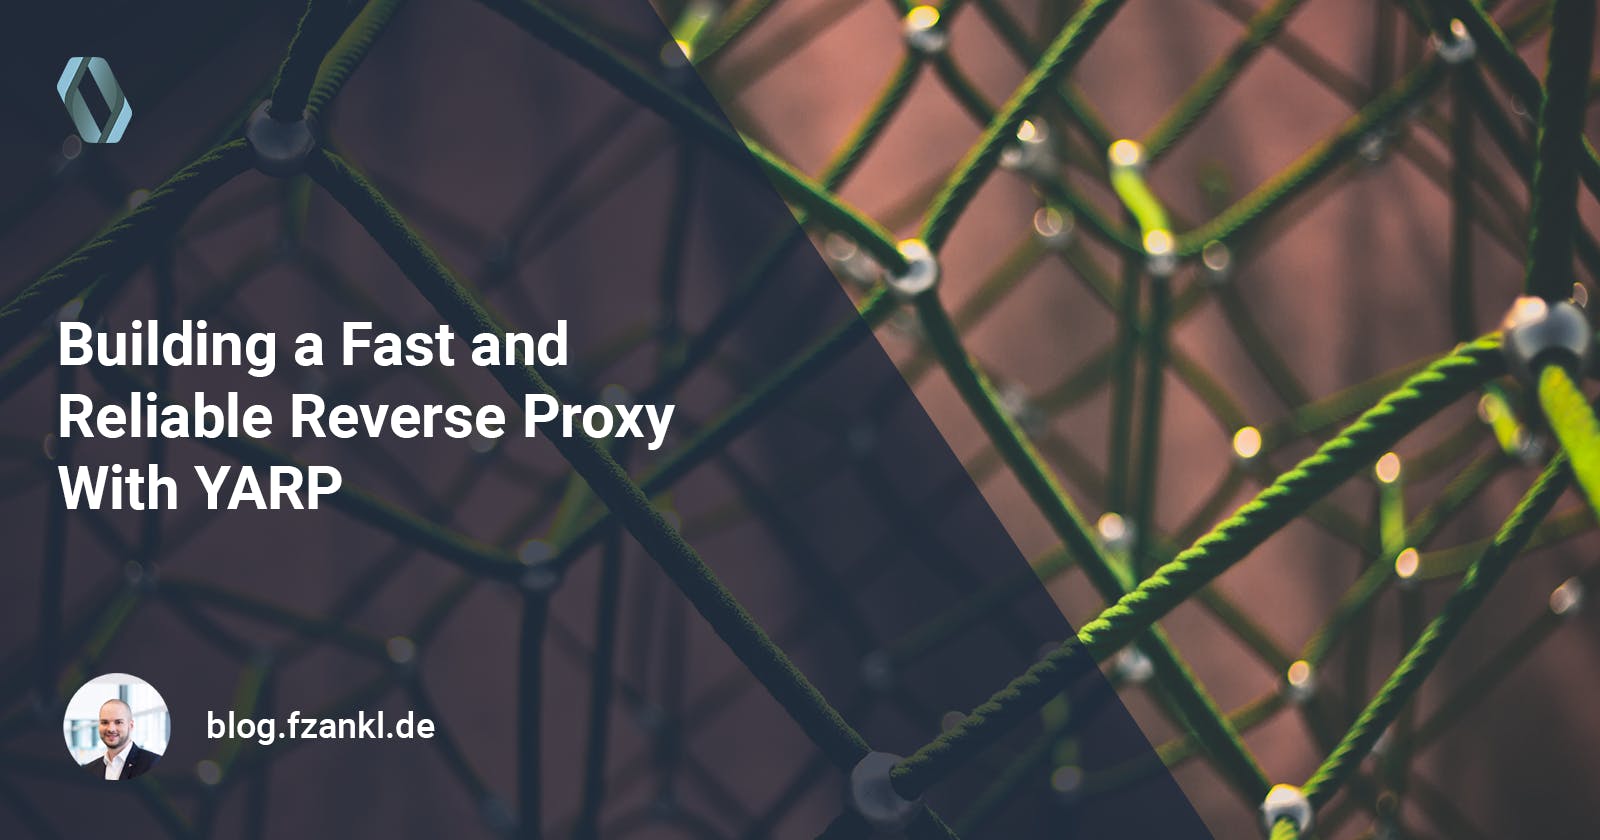 Building a Fast and Reliable Reverse Proxy With YARP